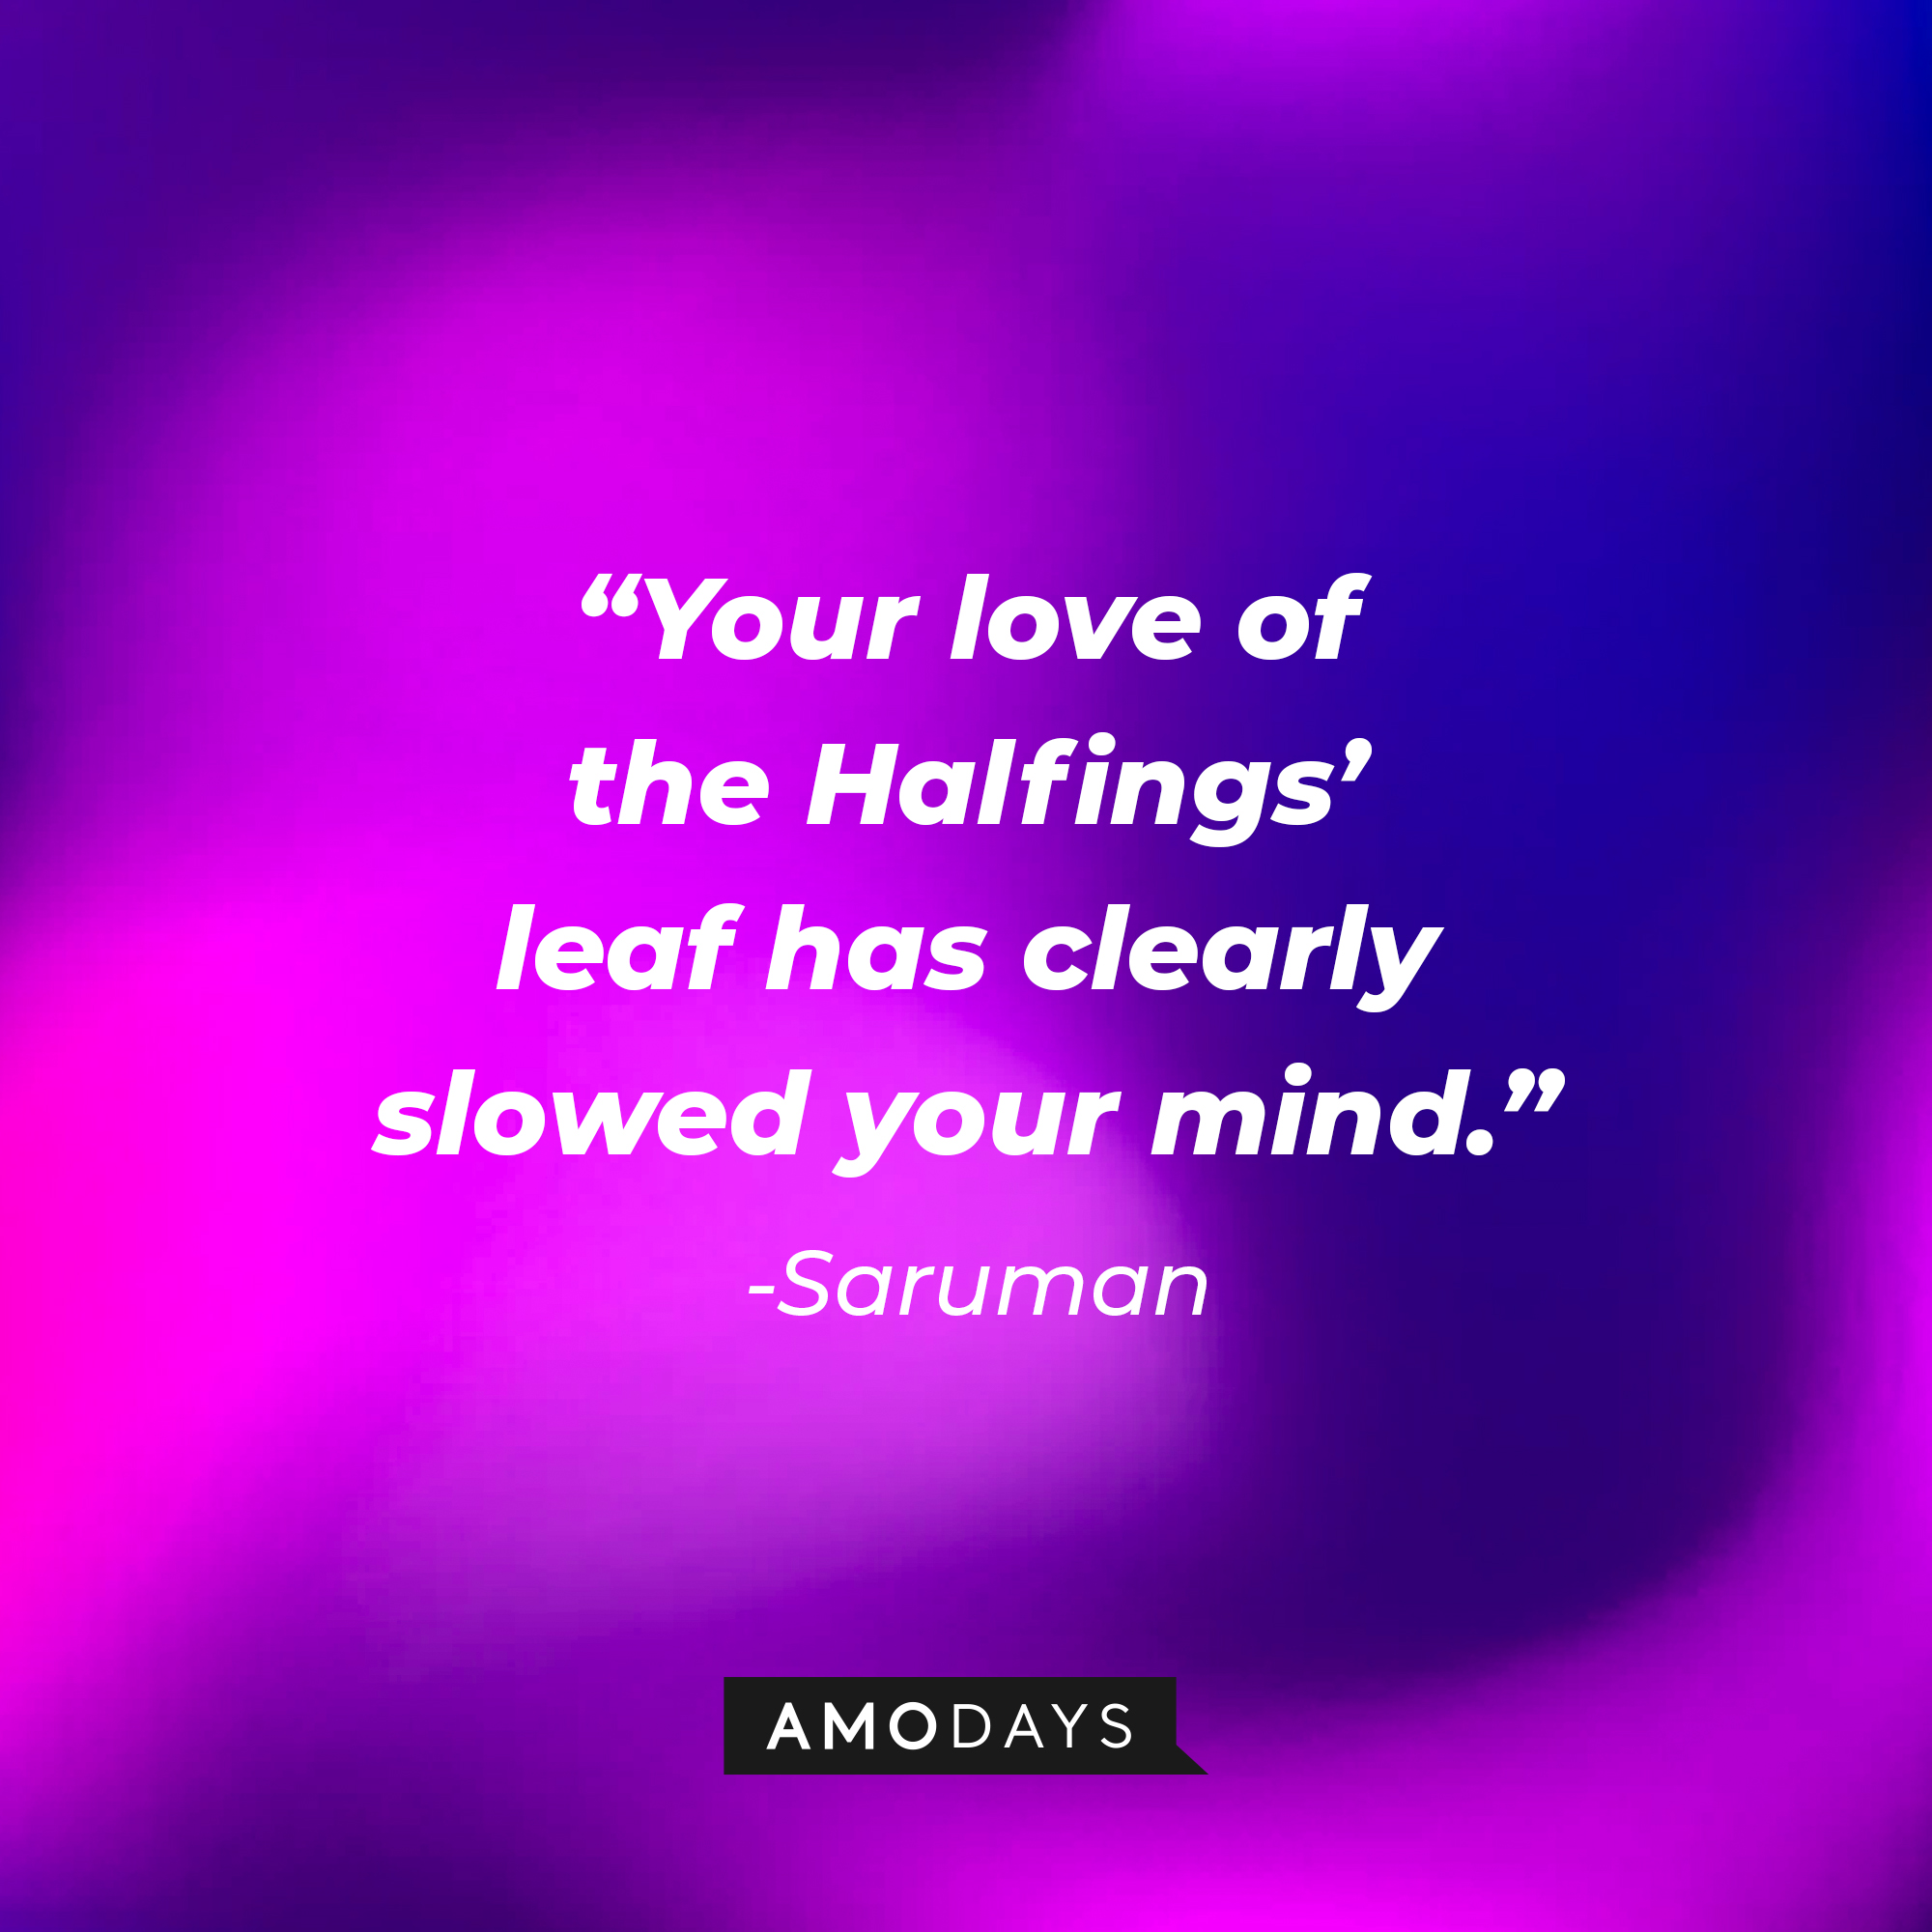 Saruman's quote: “Your love of the Halfings’ leaf has clearly slowed your mind.” | Source: Amodays